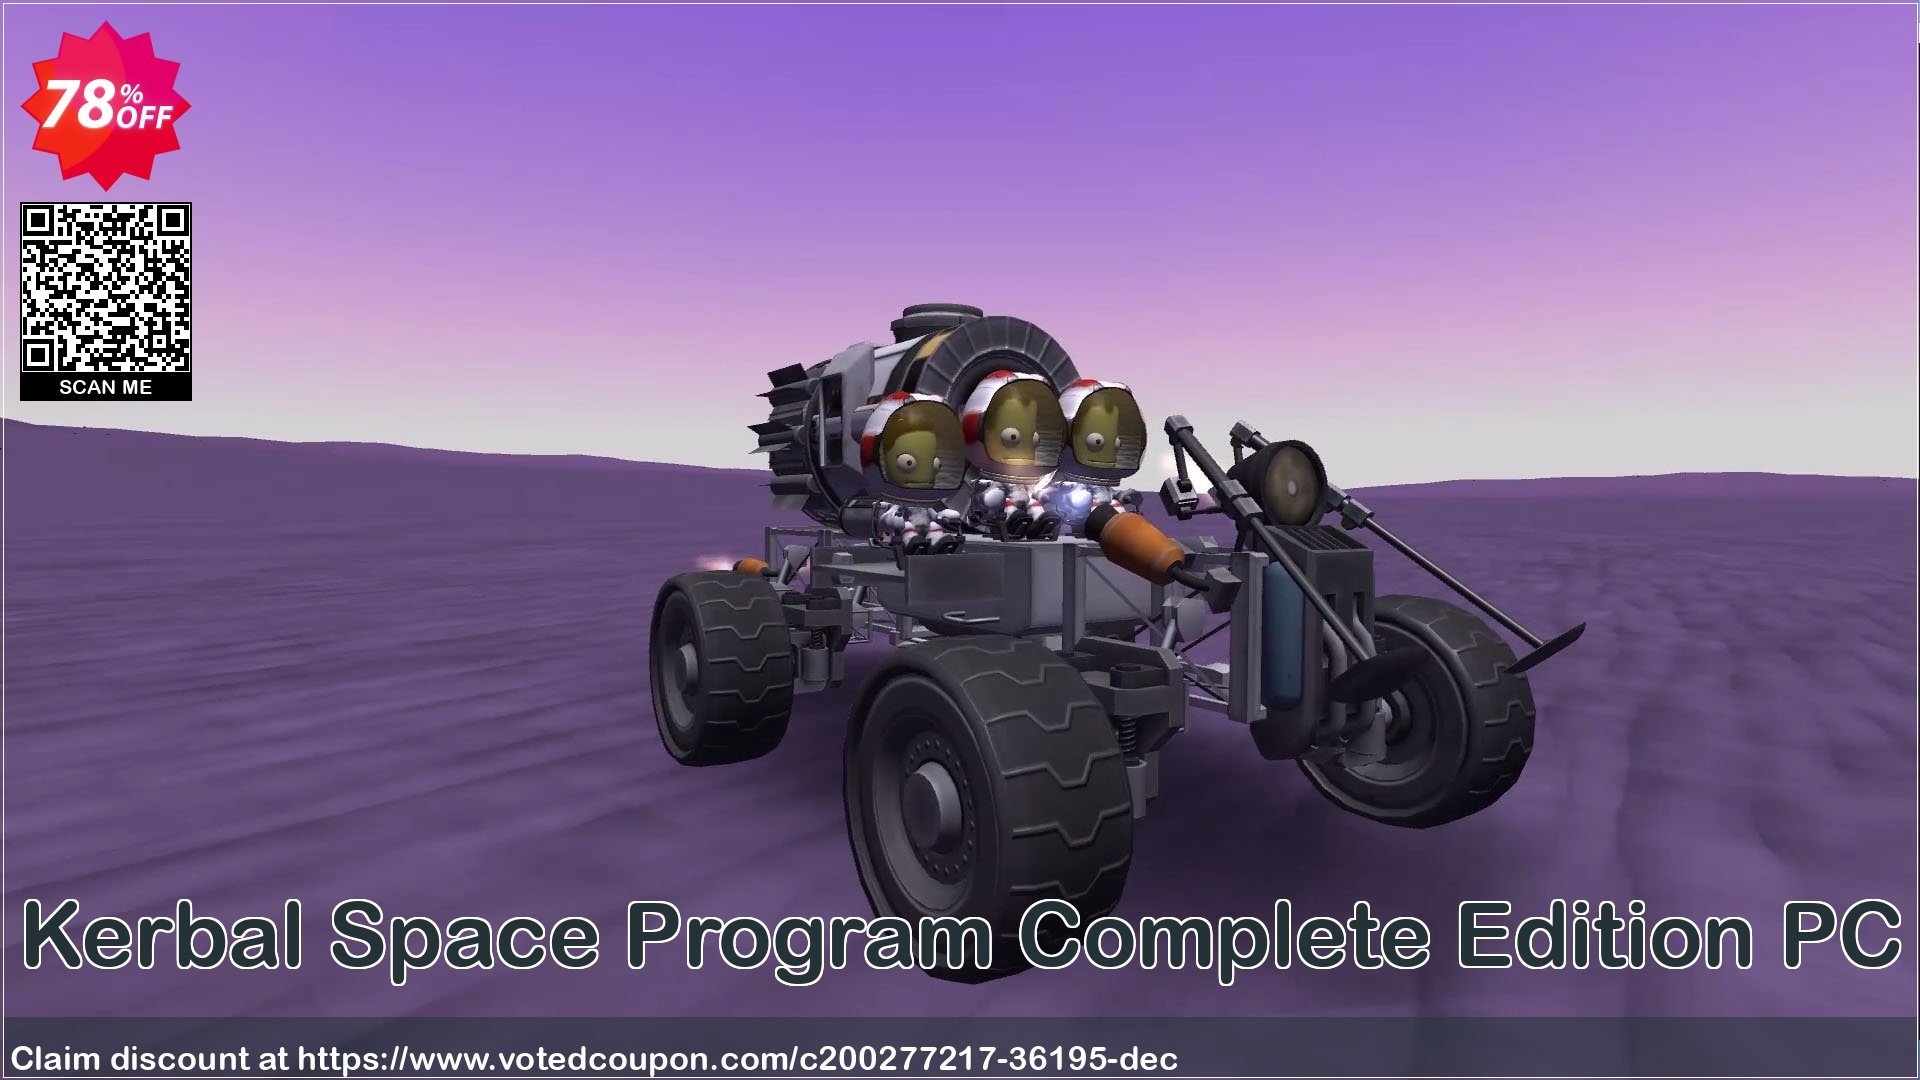 Kerbal Space Program Complete Edition PC Coupon Code Apr 2024, 78% OFF - VotedCoupon